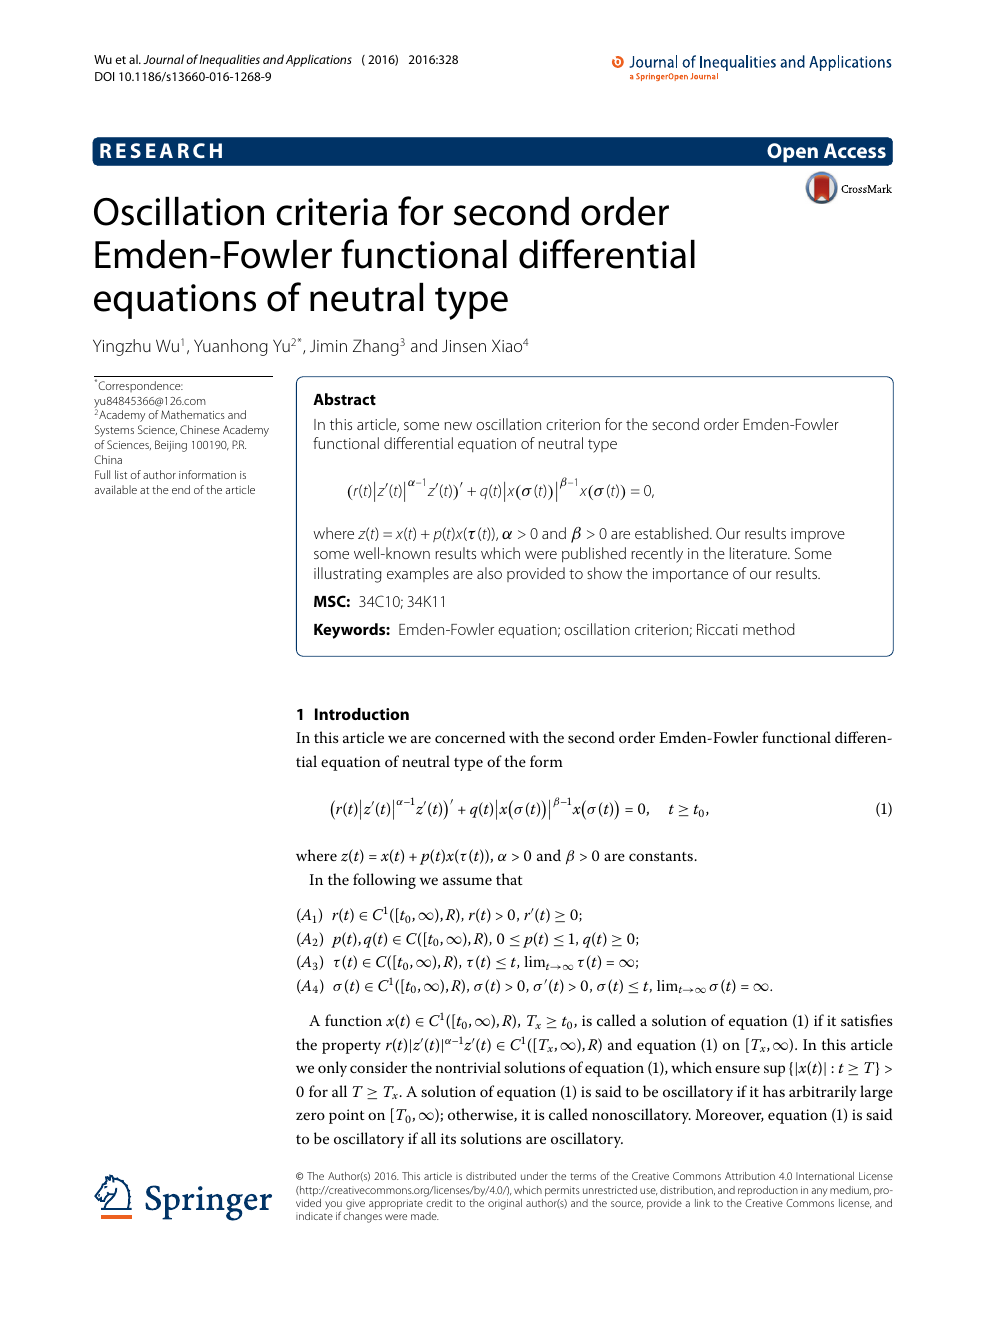 Oscillation Criteria For Second Order Emden Fowler Functional Differential Equations Of Neutral Type Topic Of Research Paper In Mathematics Download Scholarly Article Pdf And Read For Free On Cyberleninka Open Science Hub